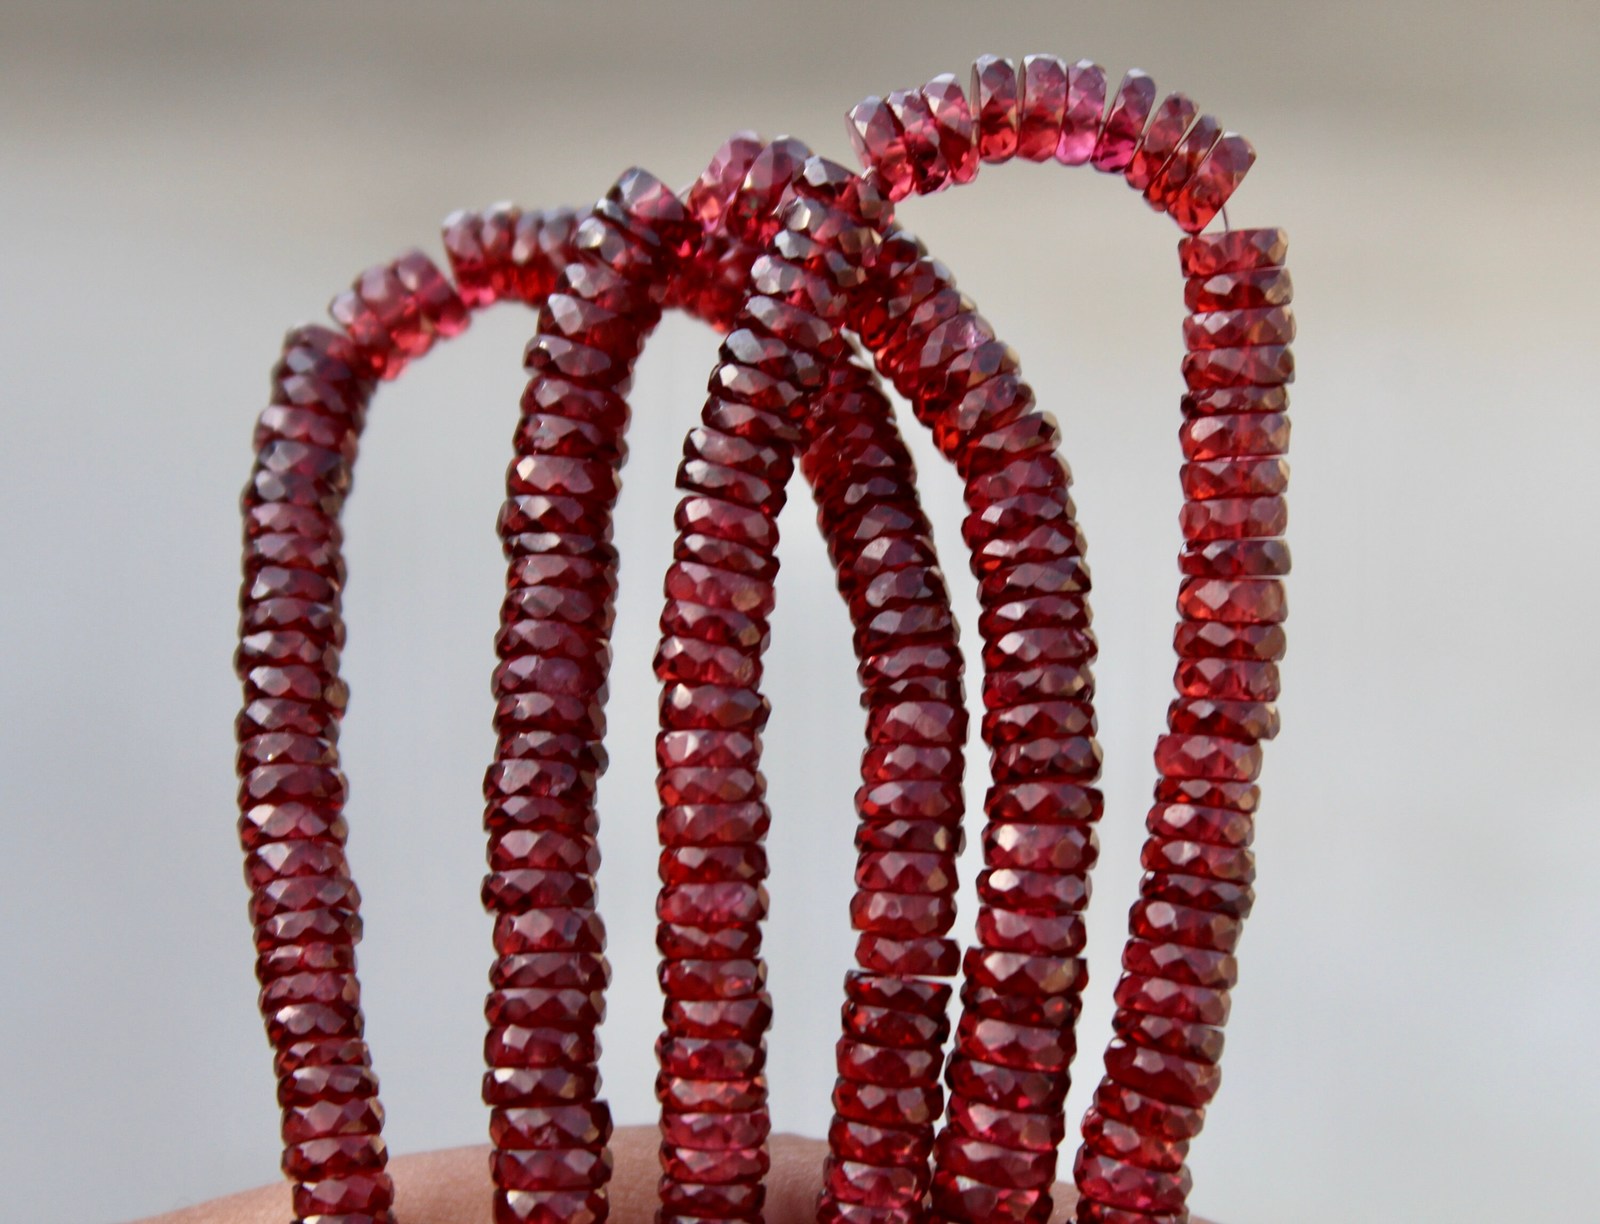 Natural 8 inches of faceted garnet heishi coin gemstone 5 mm approx..... wholesa - $62.99